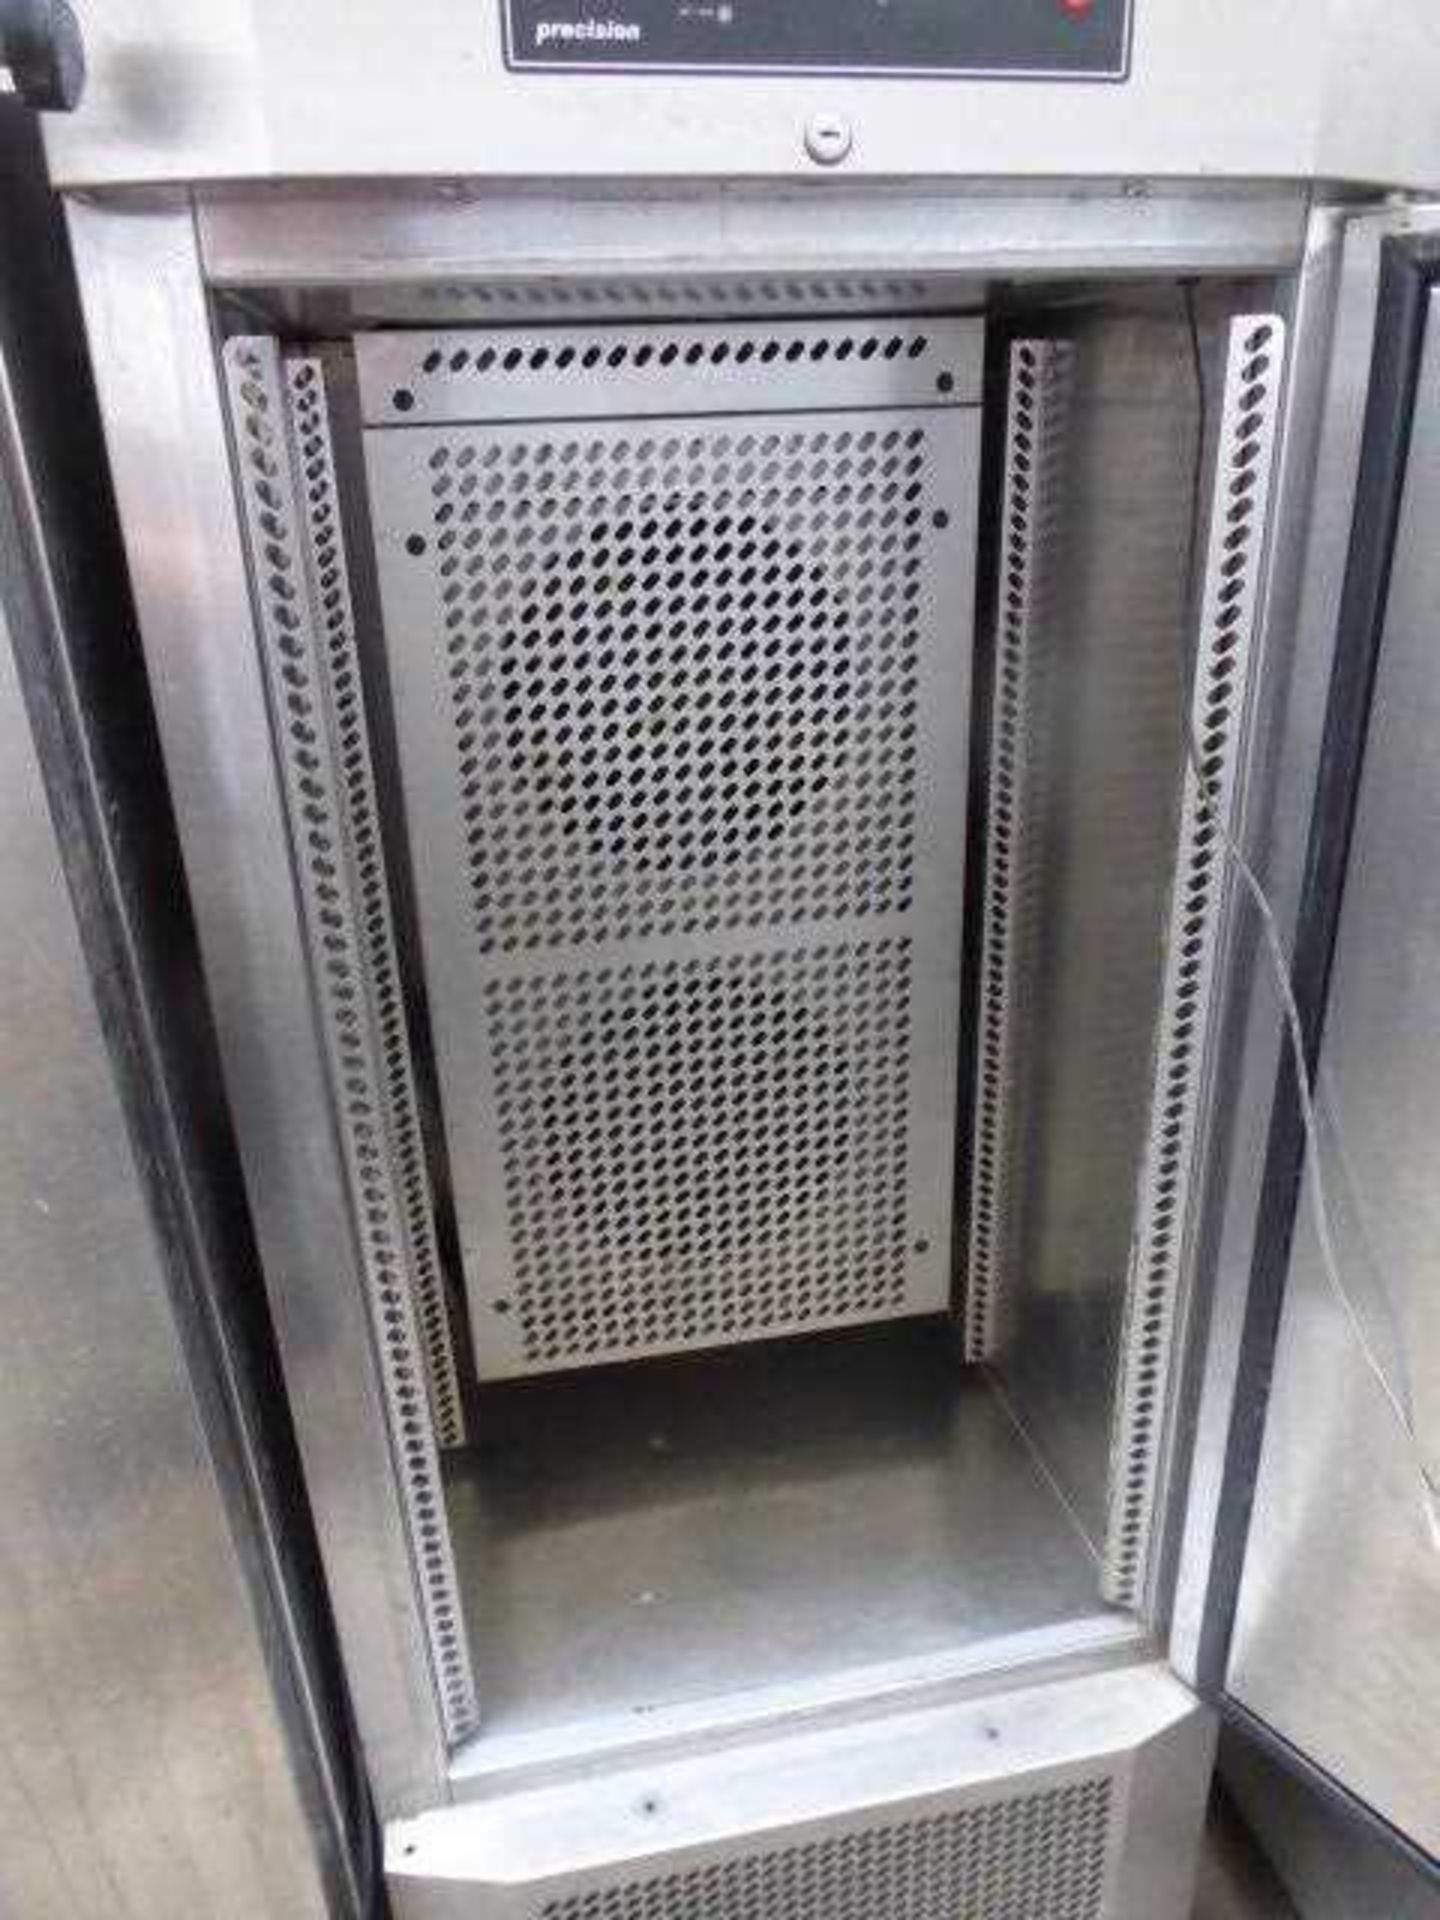 70cm Precision PCF351SS single door blast chiller (Gas R404A) - Image 2 of 2